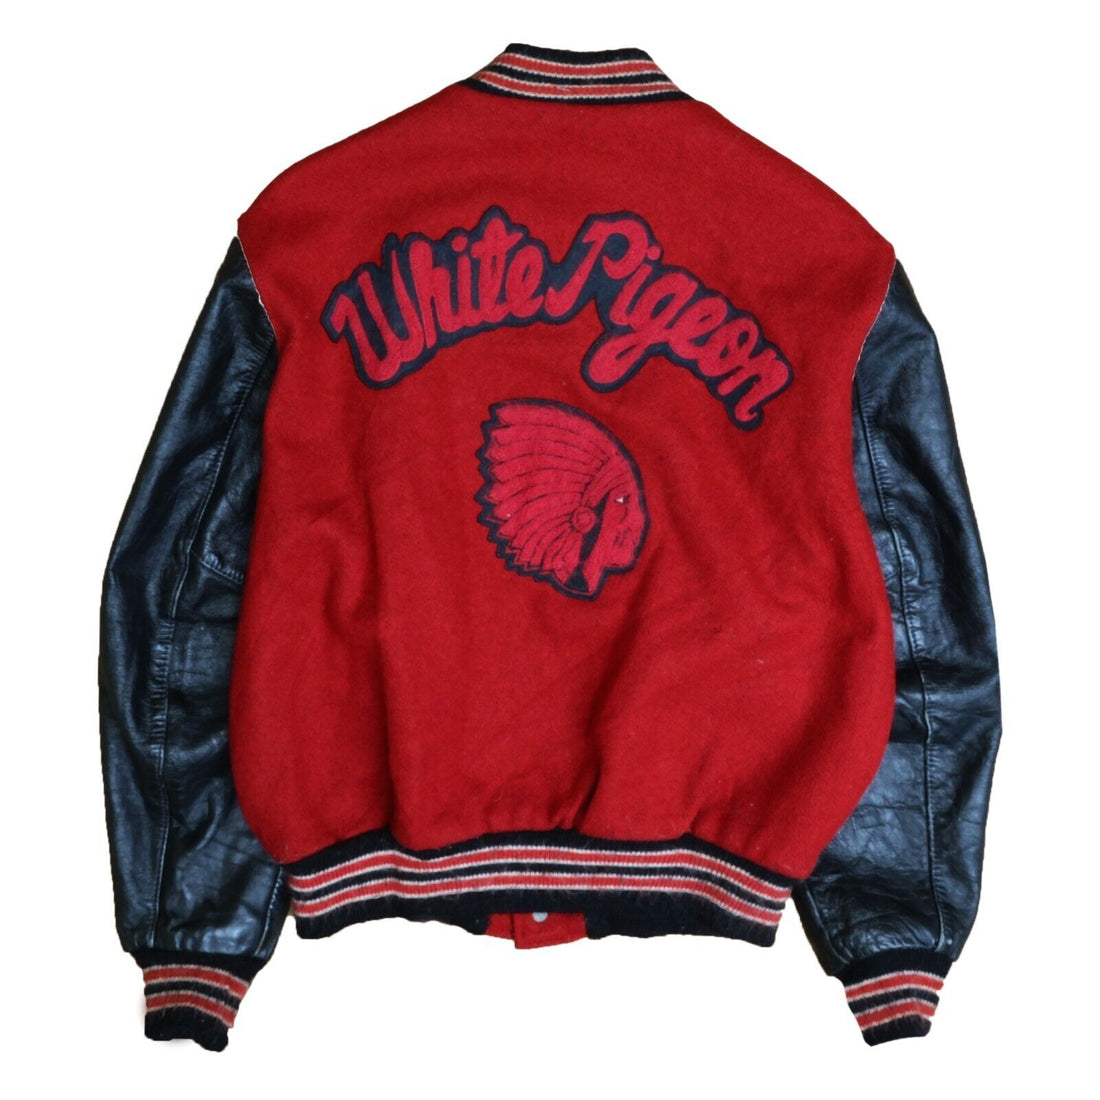 Vintage White Pigeon Chief Head Leather Wool Varsity Jacket Size 42 Red